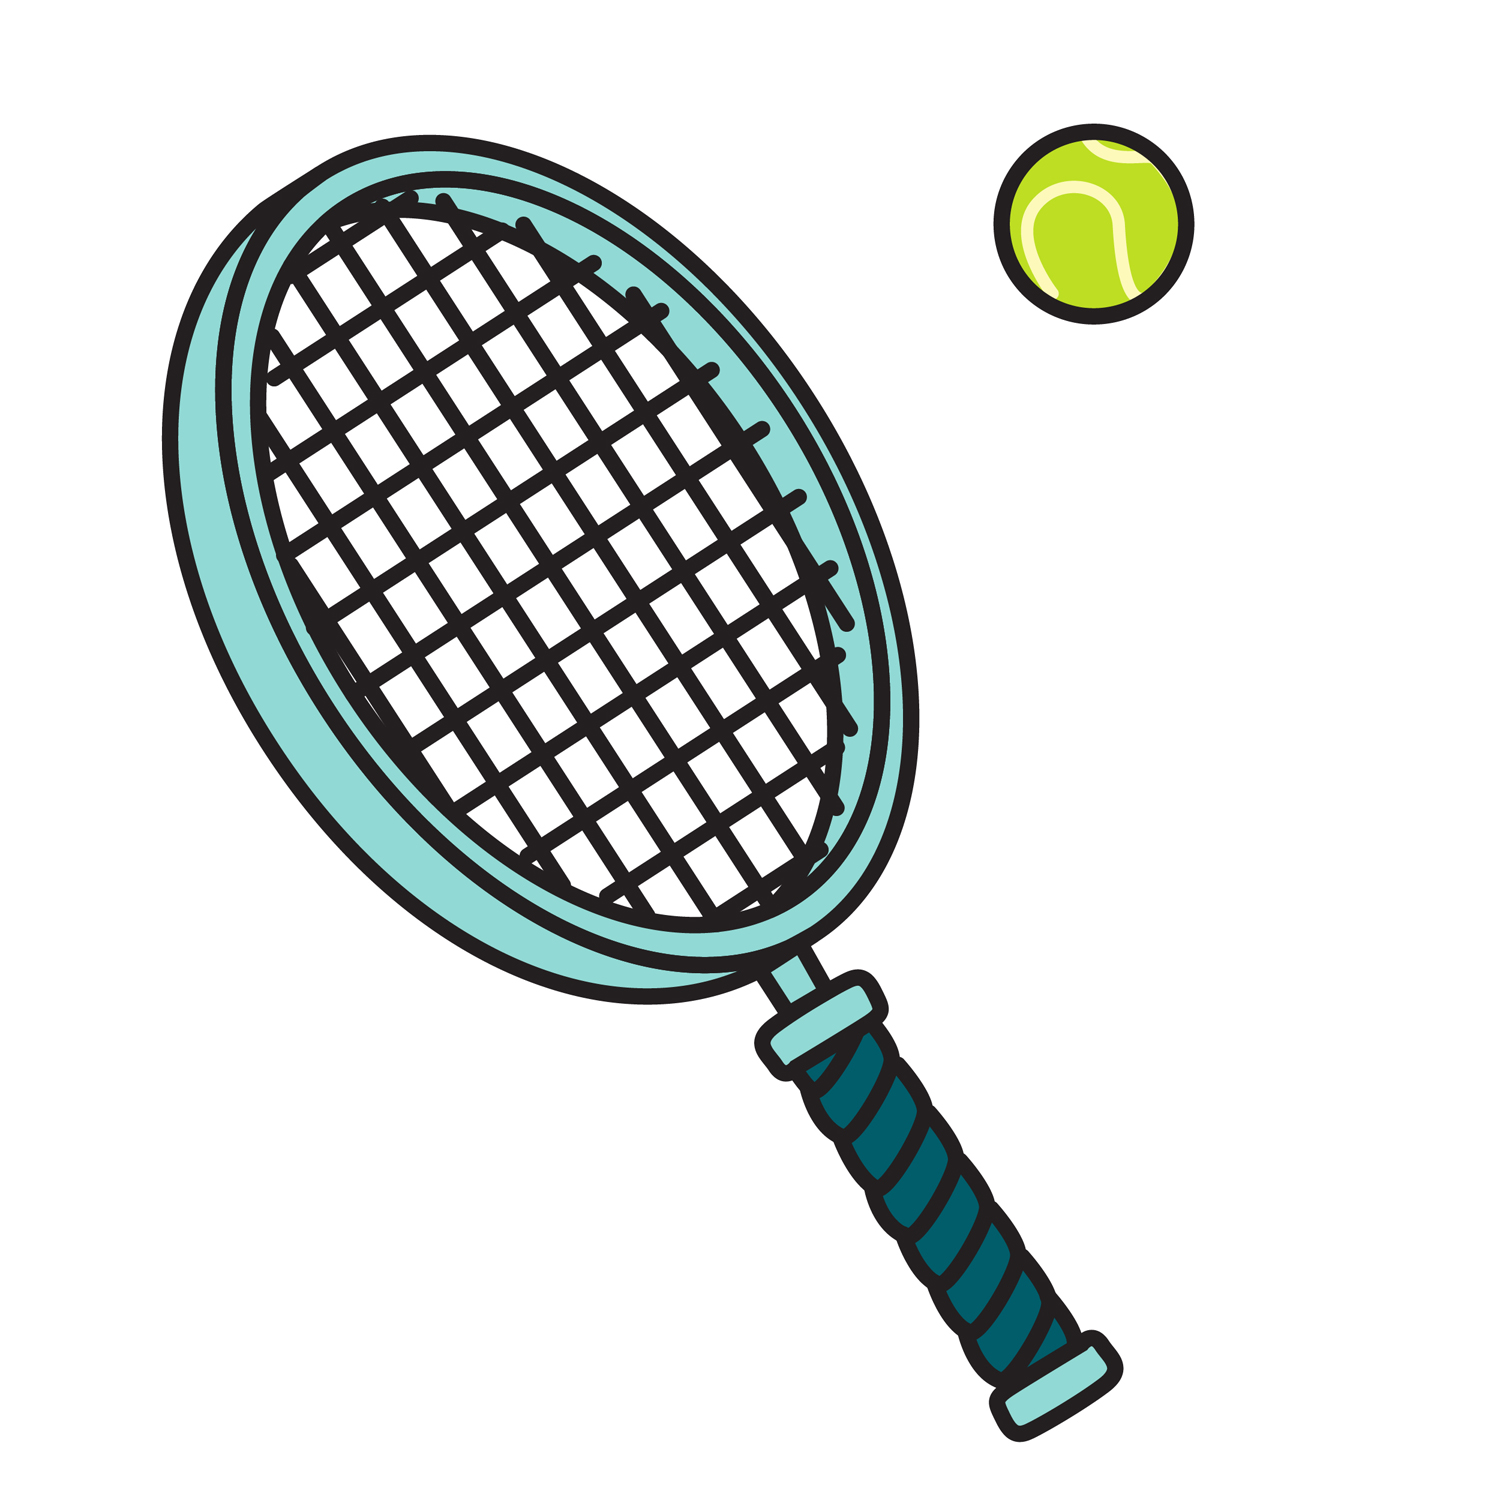 Racket With A Green Tennis Ball Perfect For Your Tennis Clipart Needs